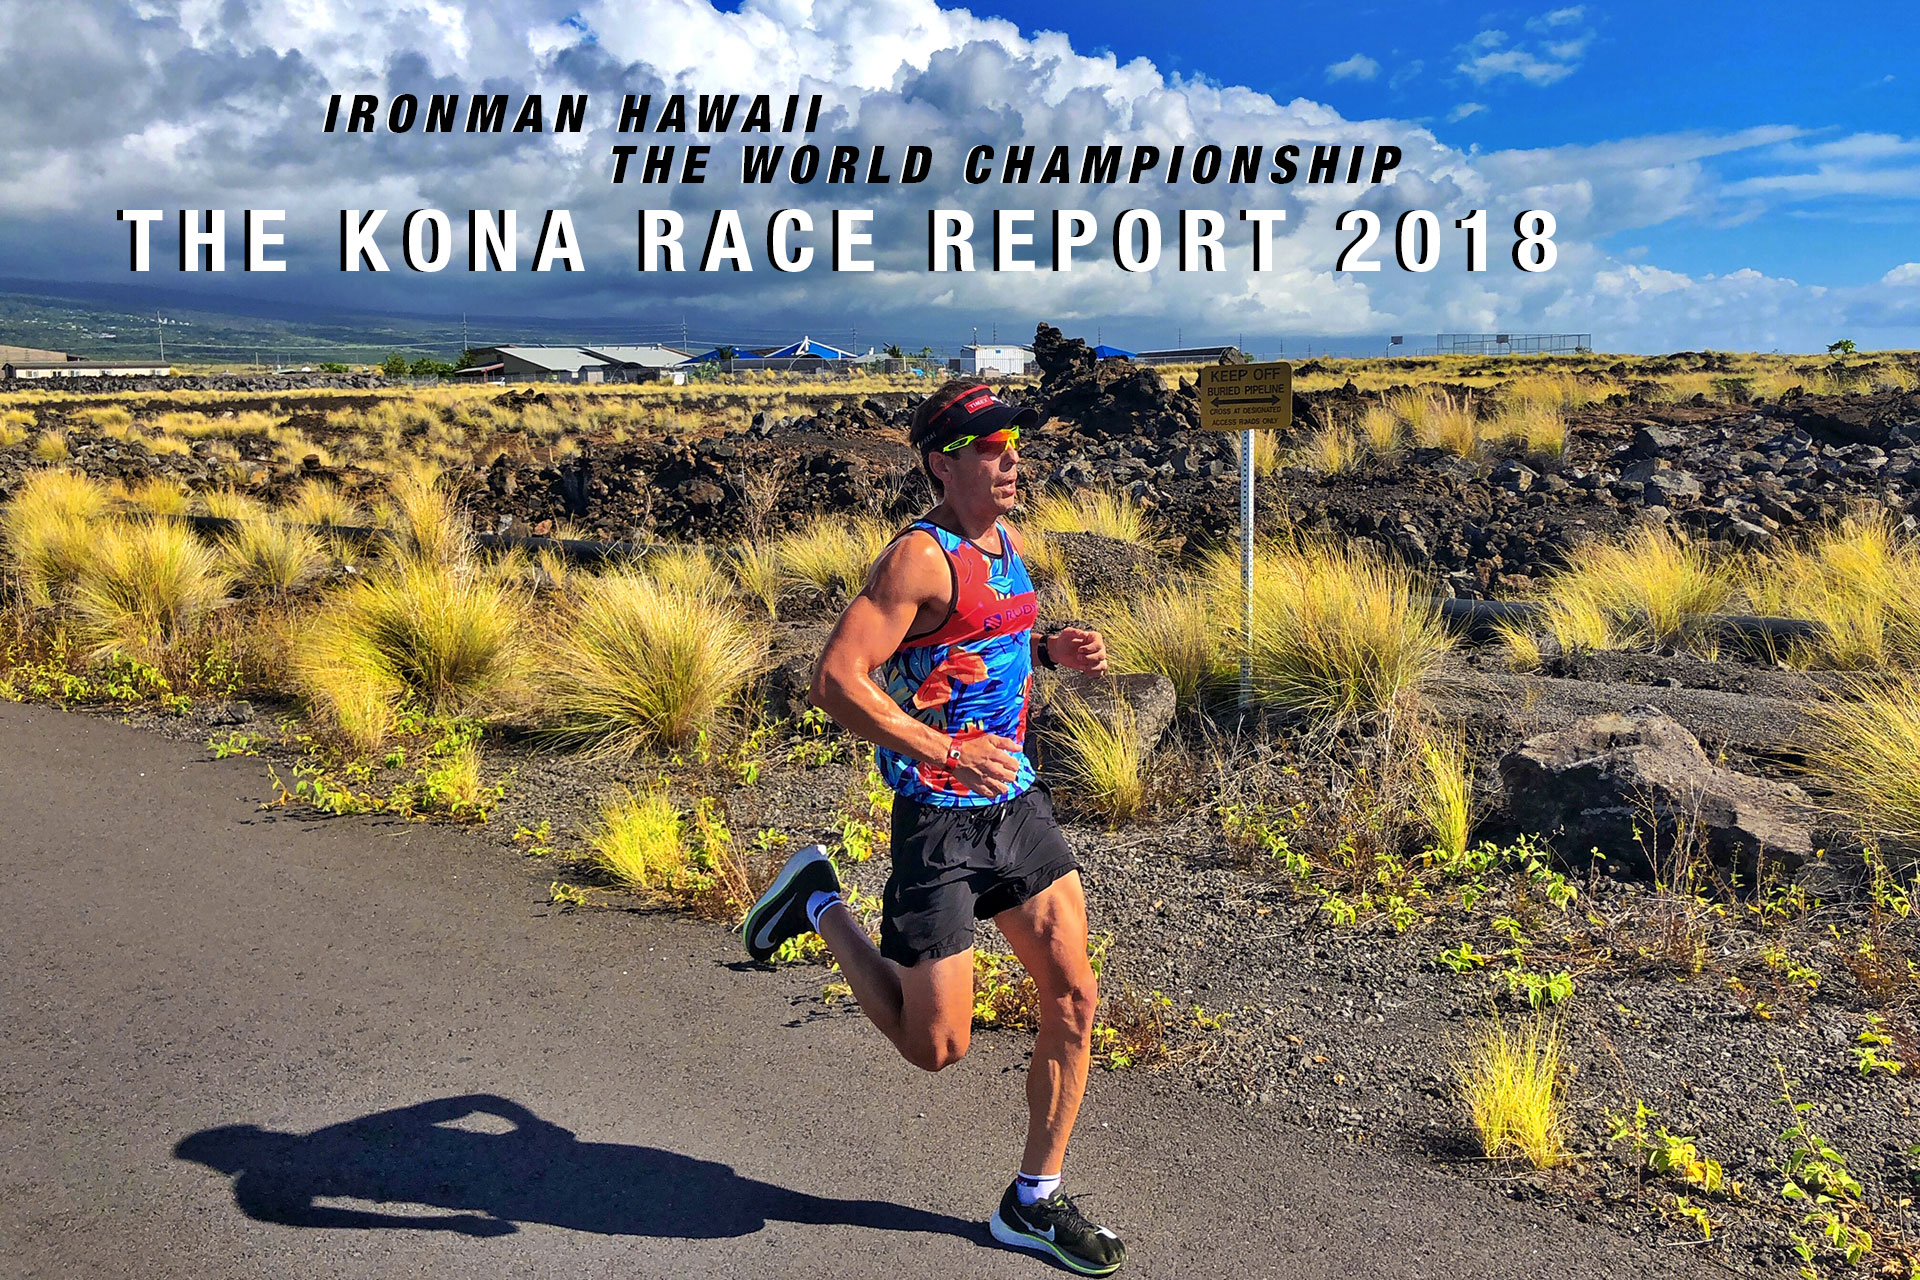 IRONMAN HAWAII 2018 The Kona Race Report 2018 by Klodian Mitri / Running the Energy Lab © Klodian Mitri